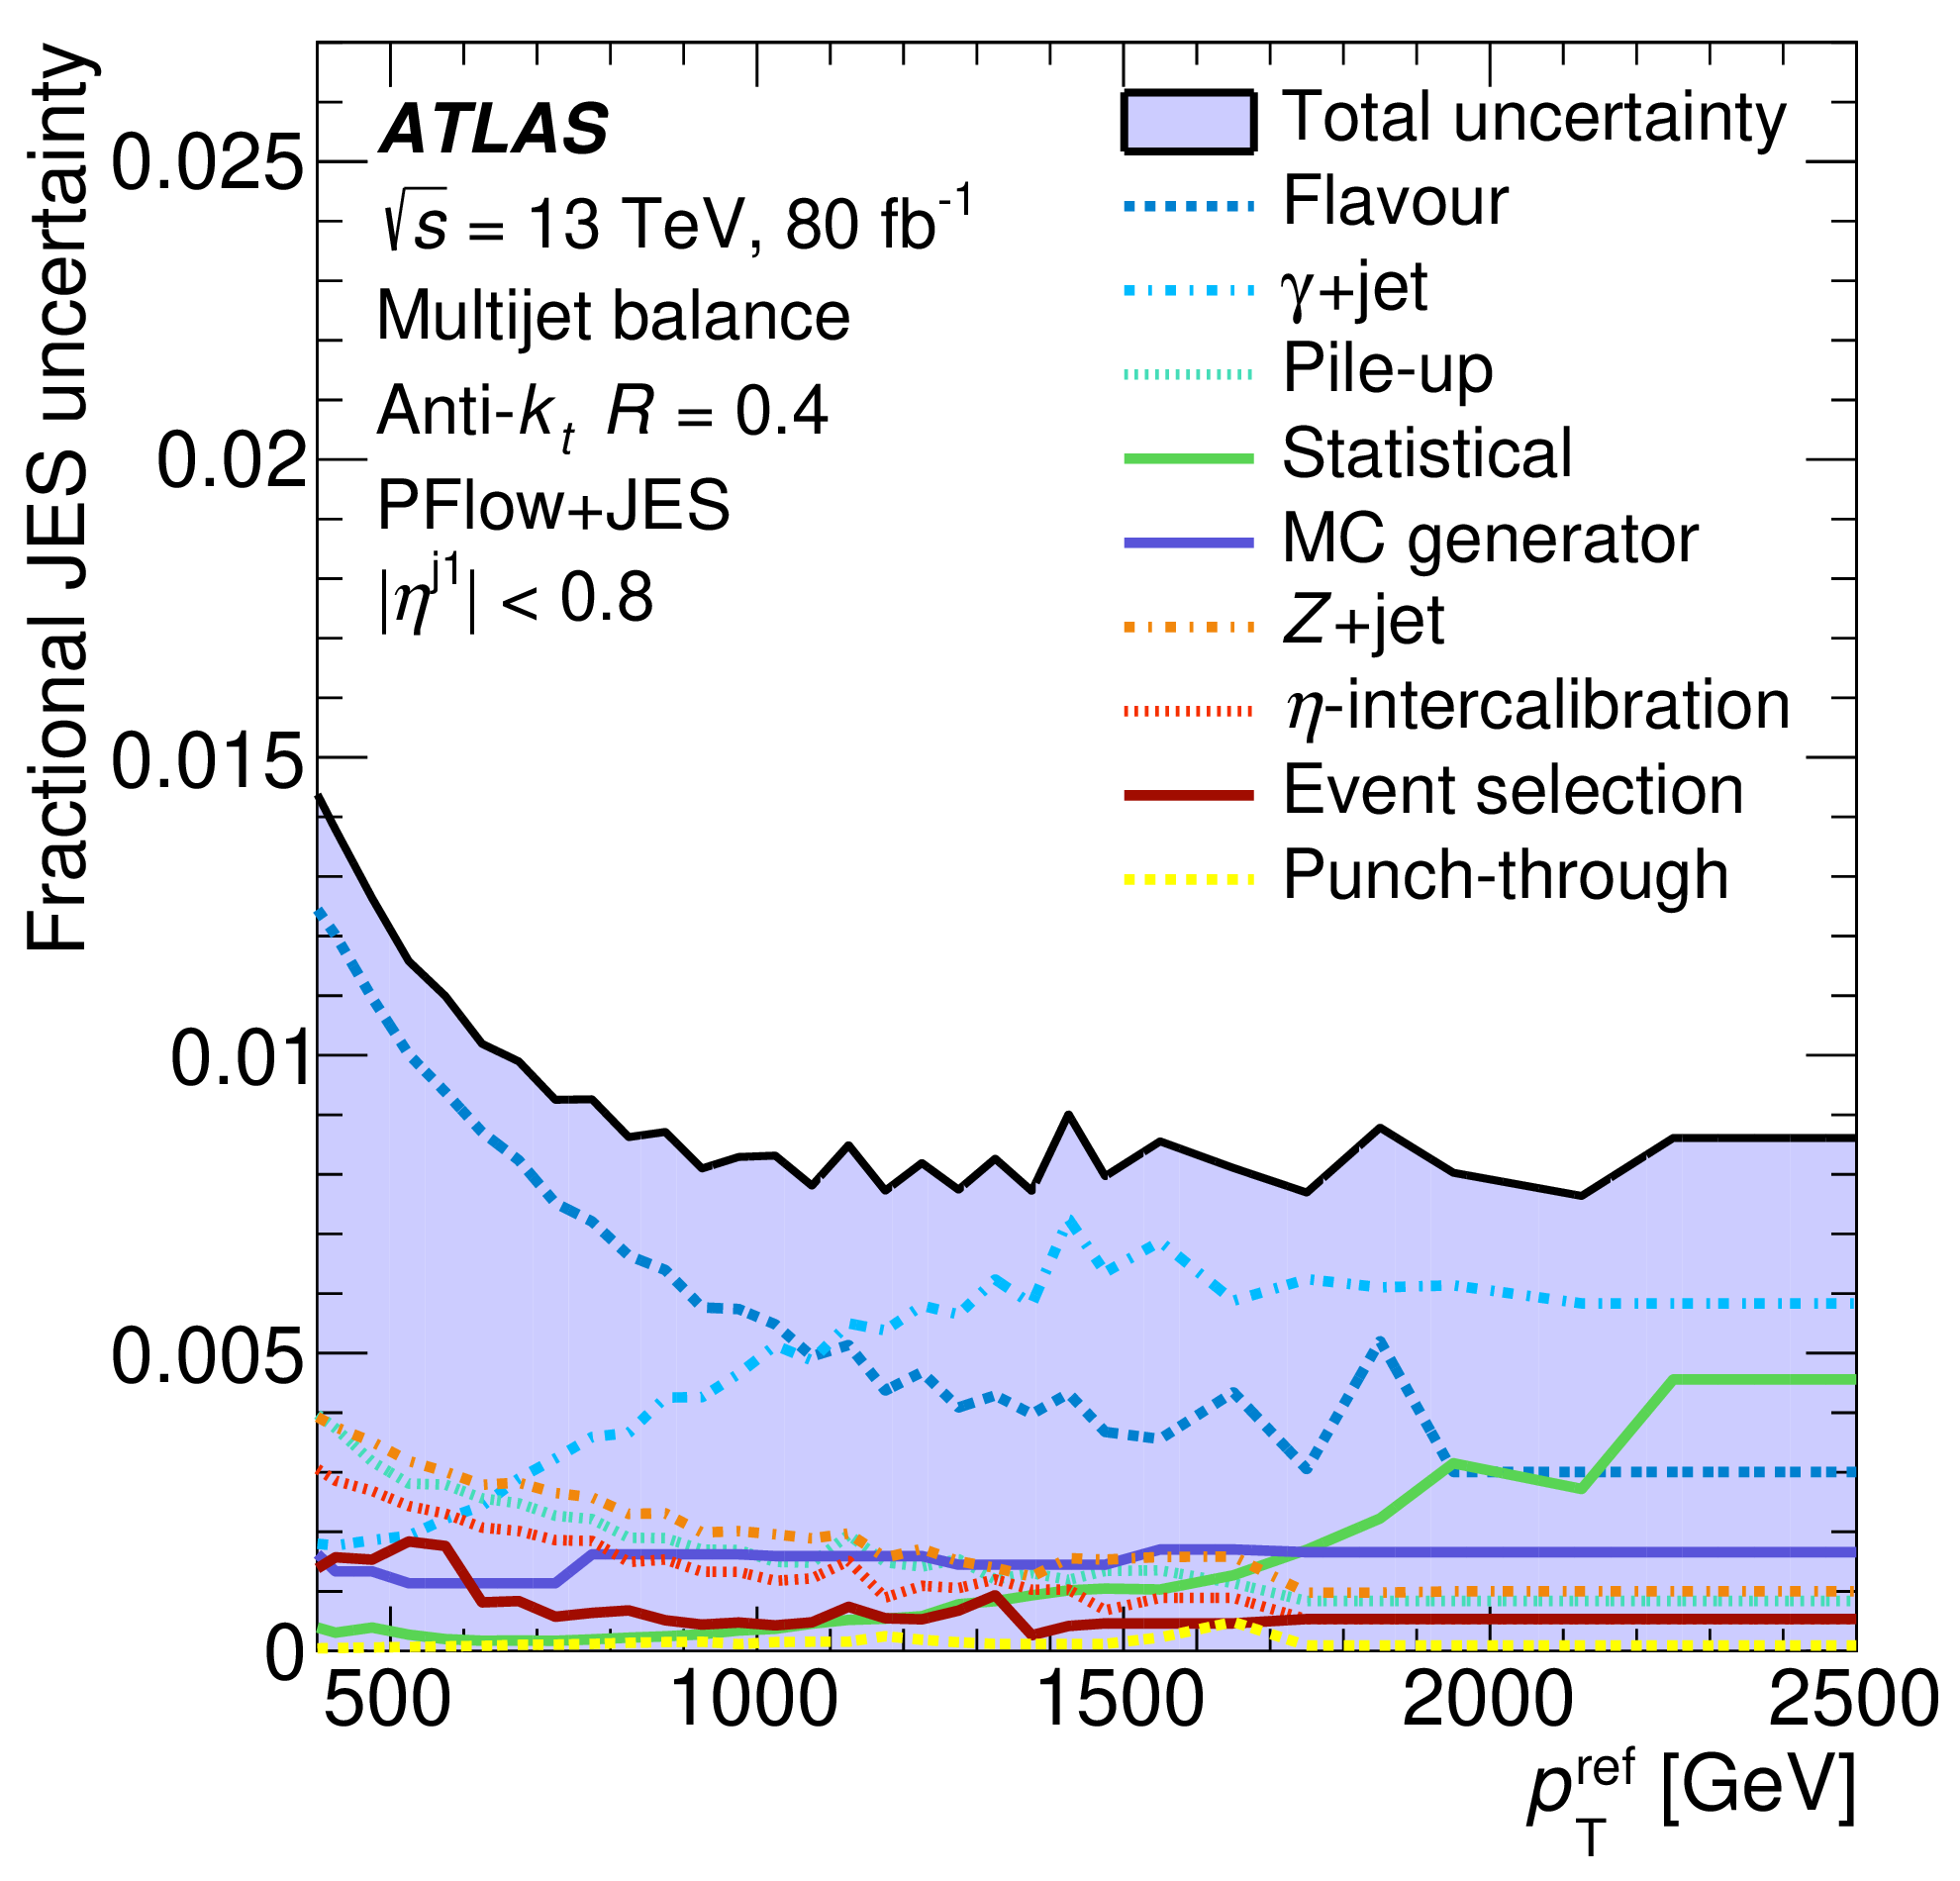 Jet energy scale and resolution measured in proton-proton collisions at sqrt(s)=13 TeV with the ATLAS detector